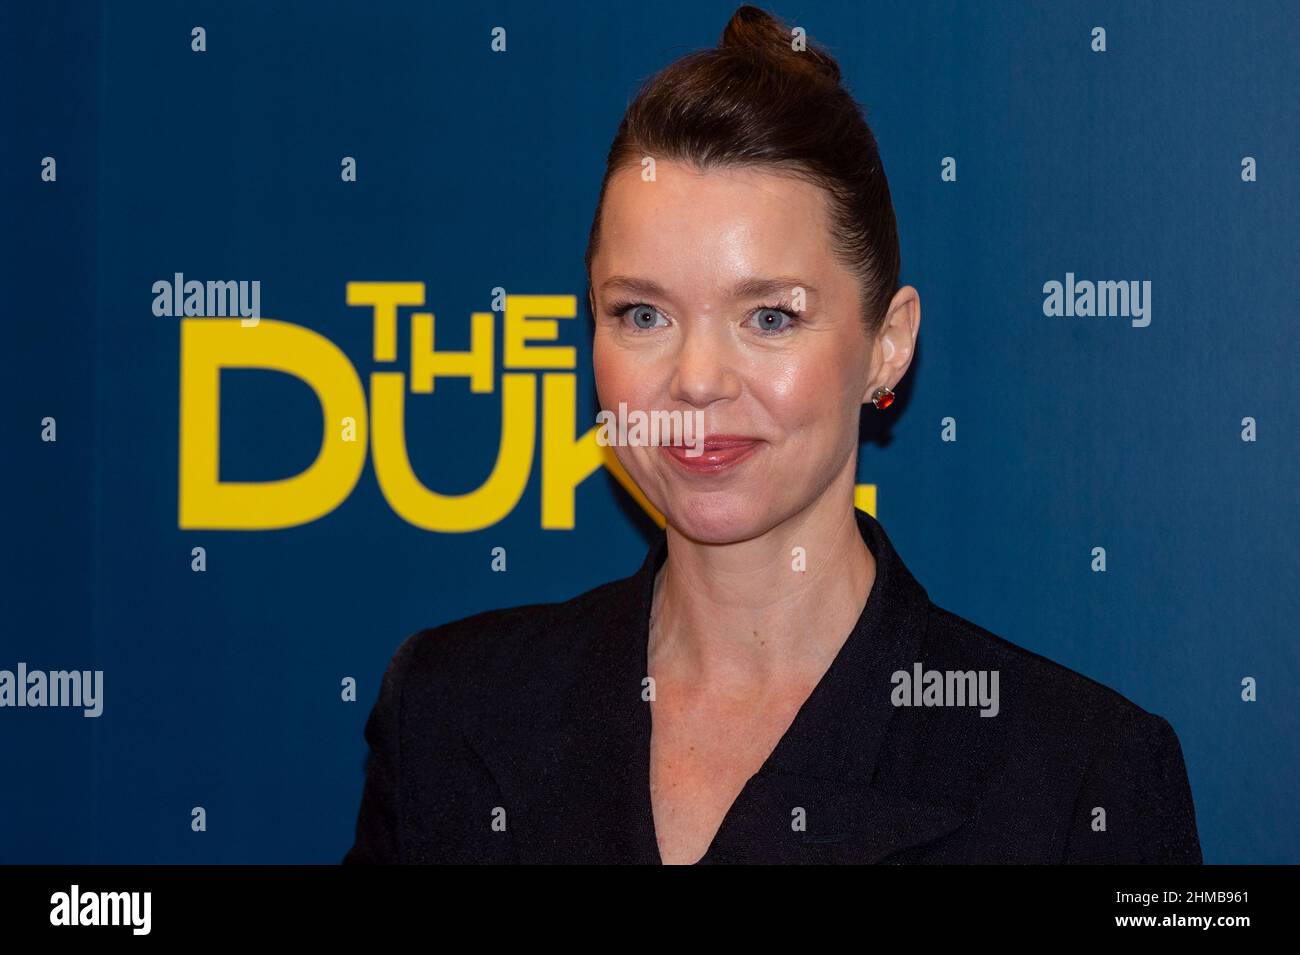 London Uk 8 February 22 Anna Maxwell Martin As Mrs Gowling At The Uk Premiere Of The Film The Duke At The National Gallery The Film Tells The True Story Of Taxi